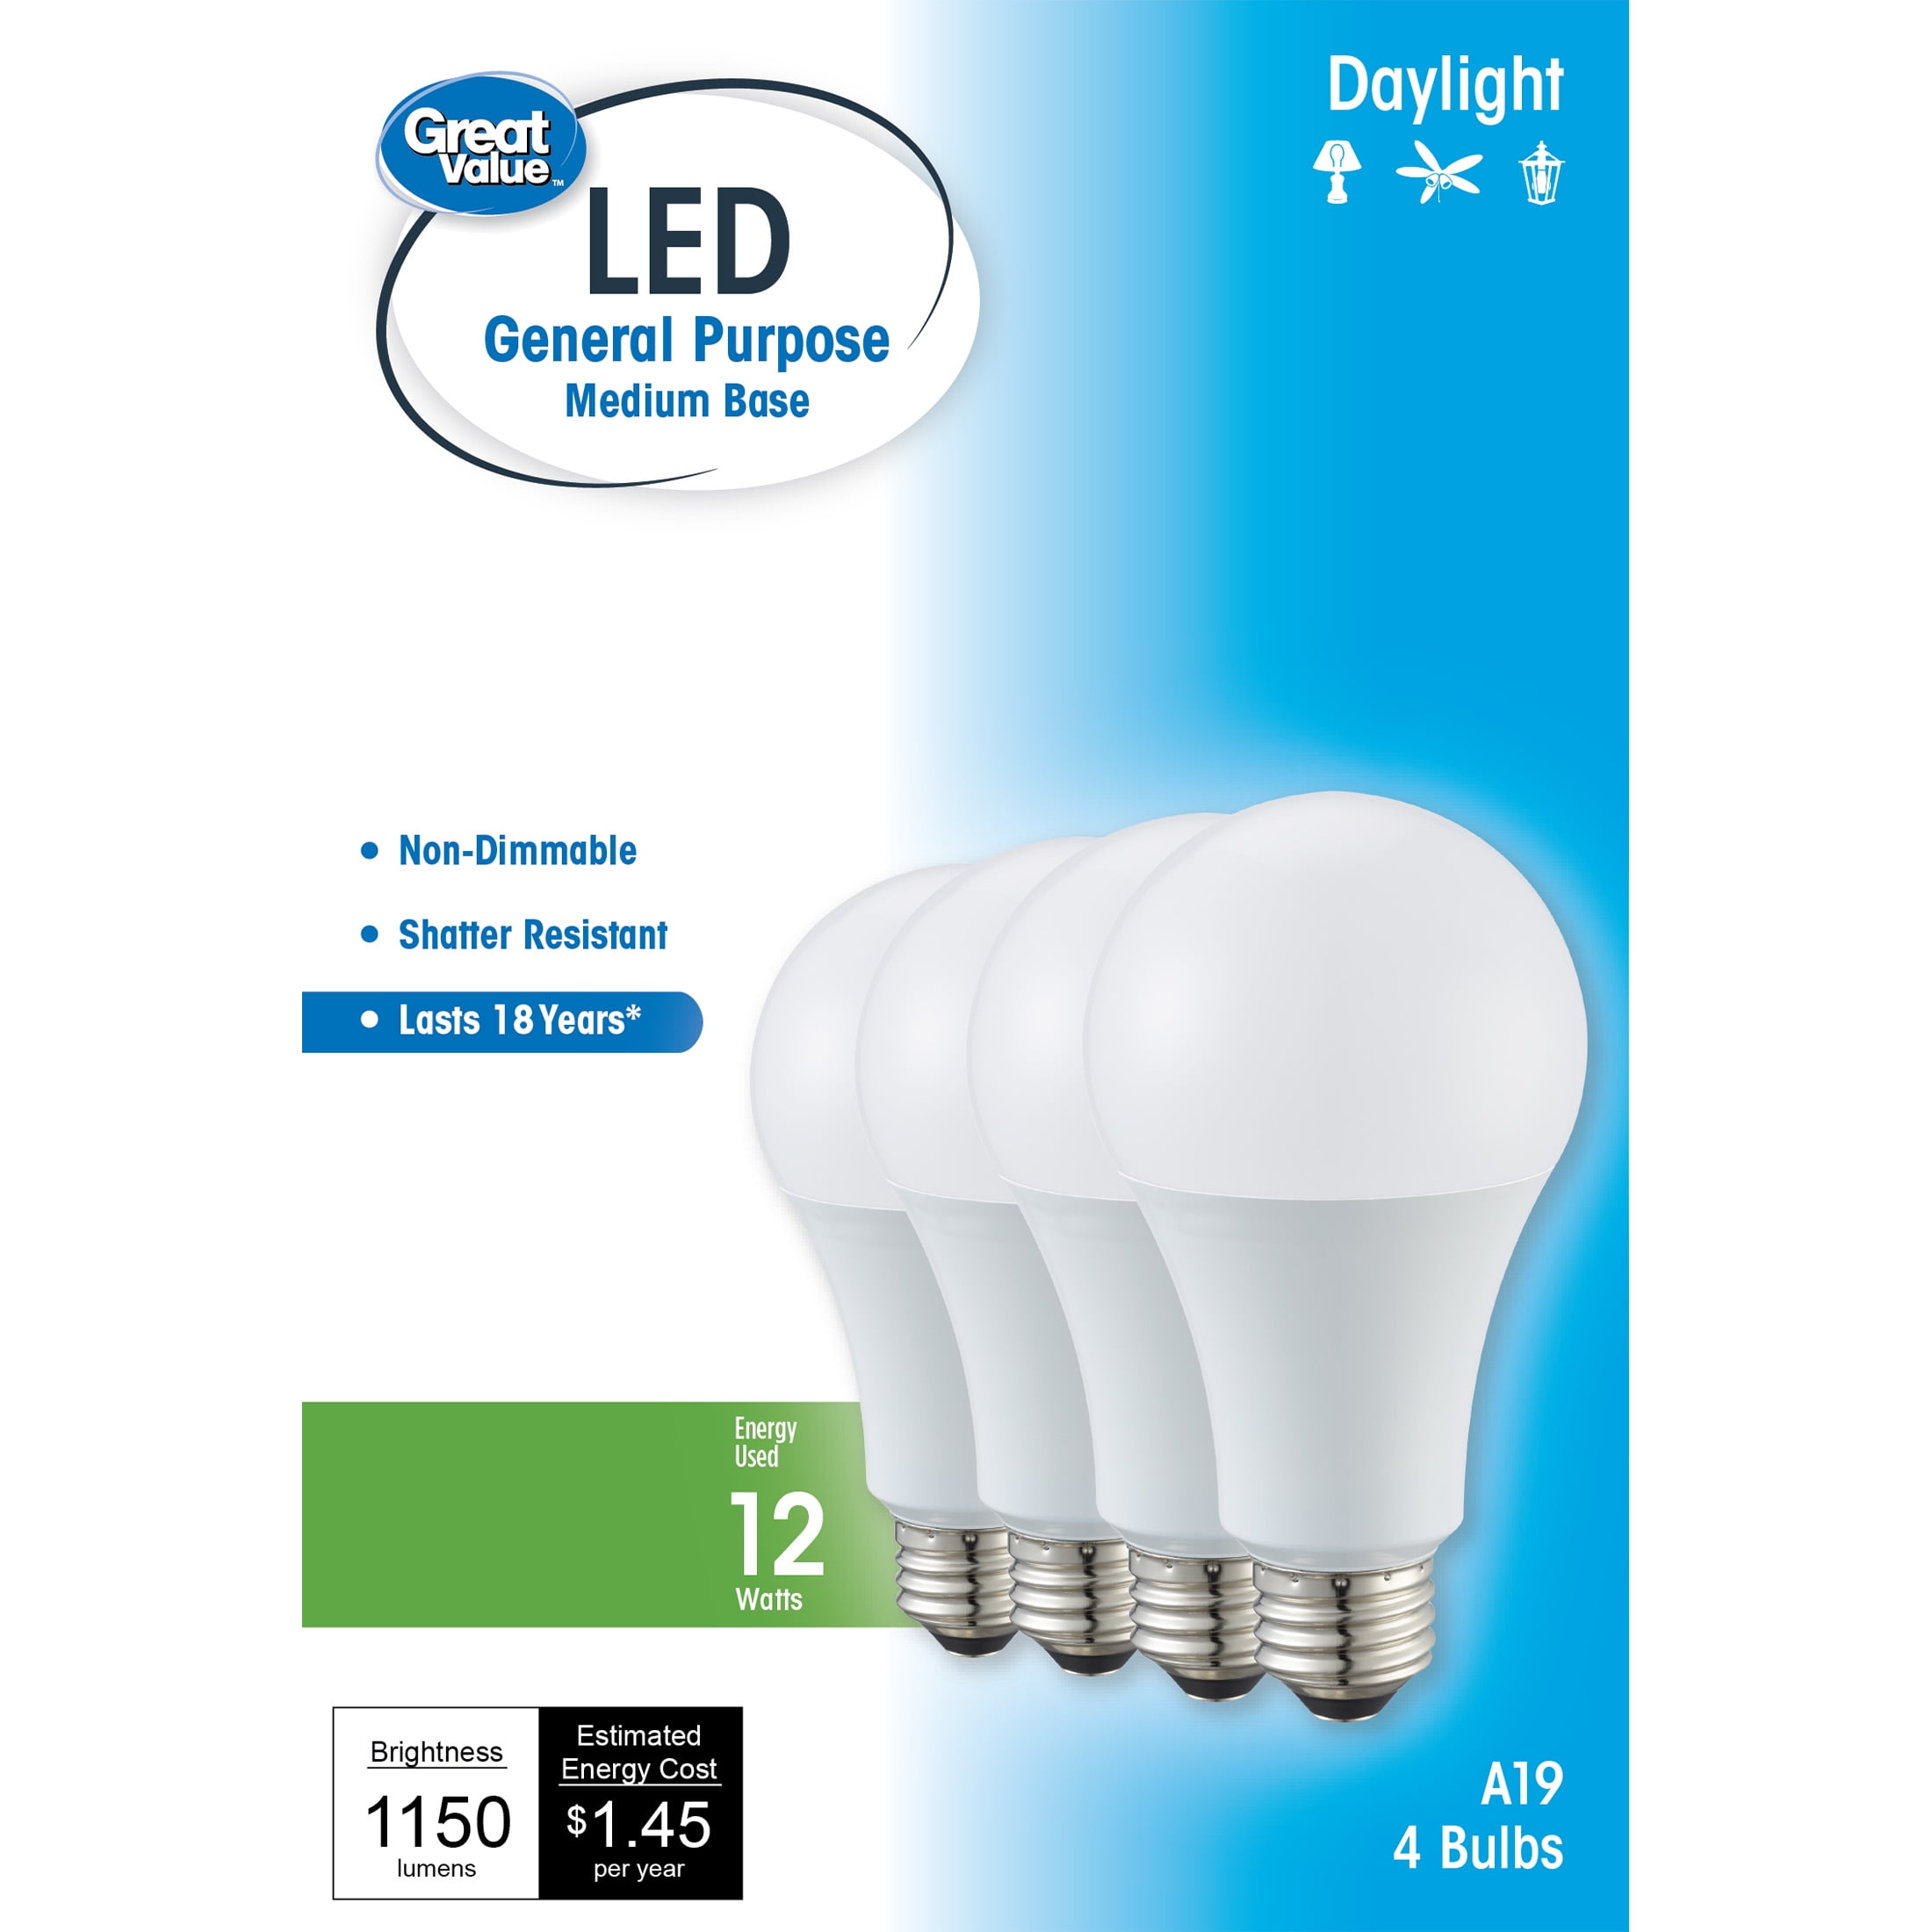 Great Value LED Light Bulb, 12W (75W Equivalent) A19 General Purpose Lamp E26 Medium Base, Non-dimmable, 4-Pack - Walmart.com